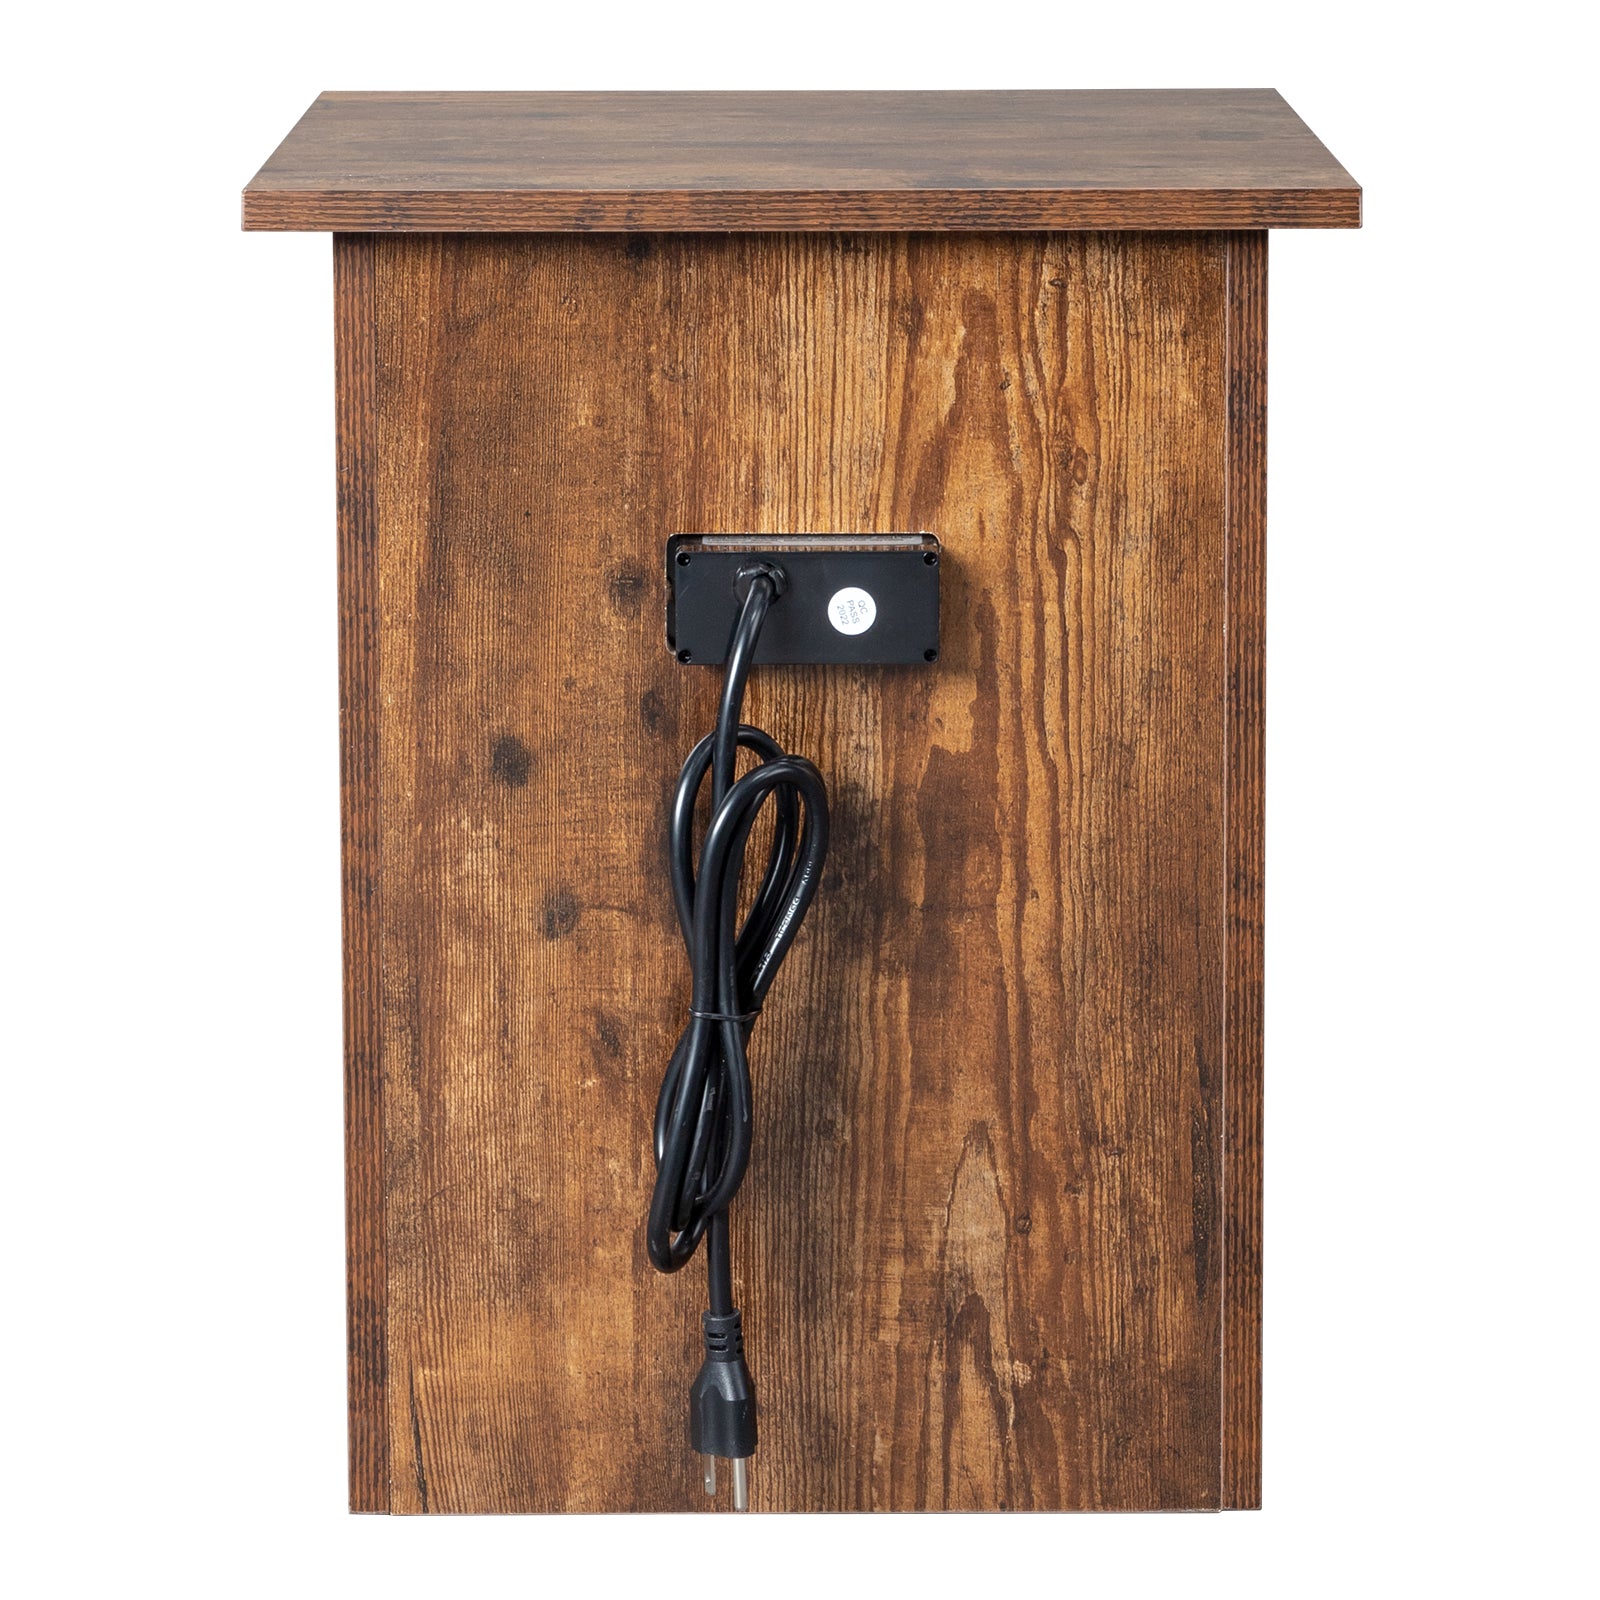 Vintage Wood Grain Color Chipboard With Triamine Can Be Pasted On The Upper And Lower Layers Of Universal Trackless Single Drawbar With 1.5M Long Power Cord USB Socket Bedside Cabinet